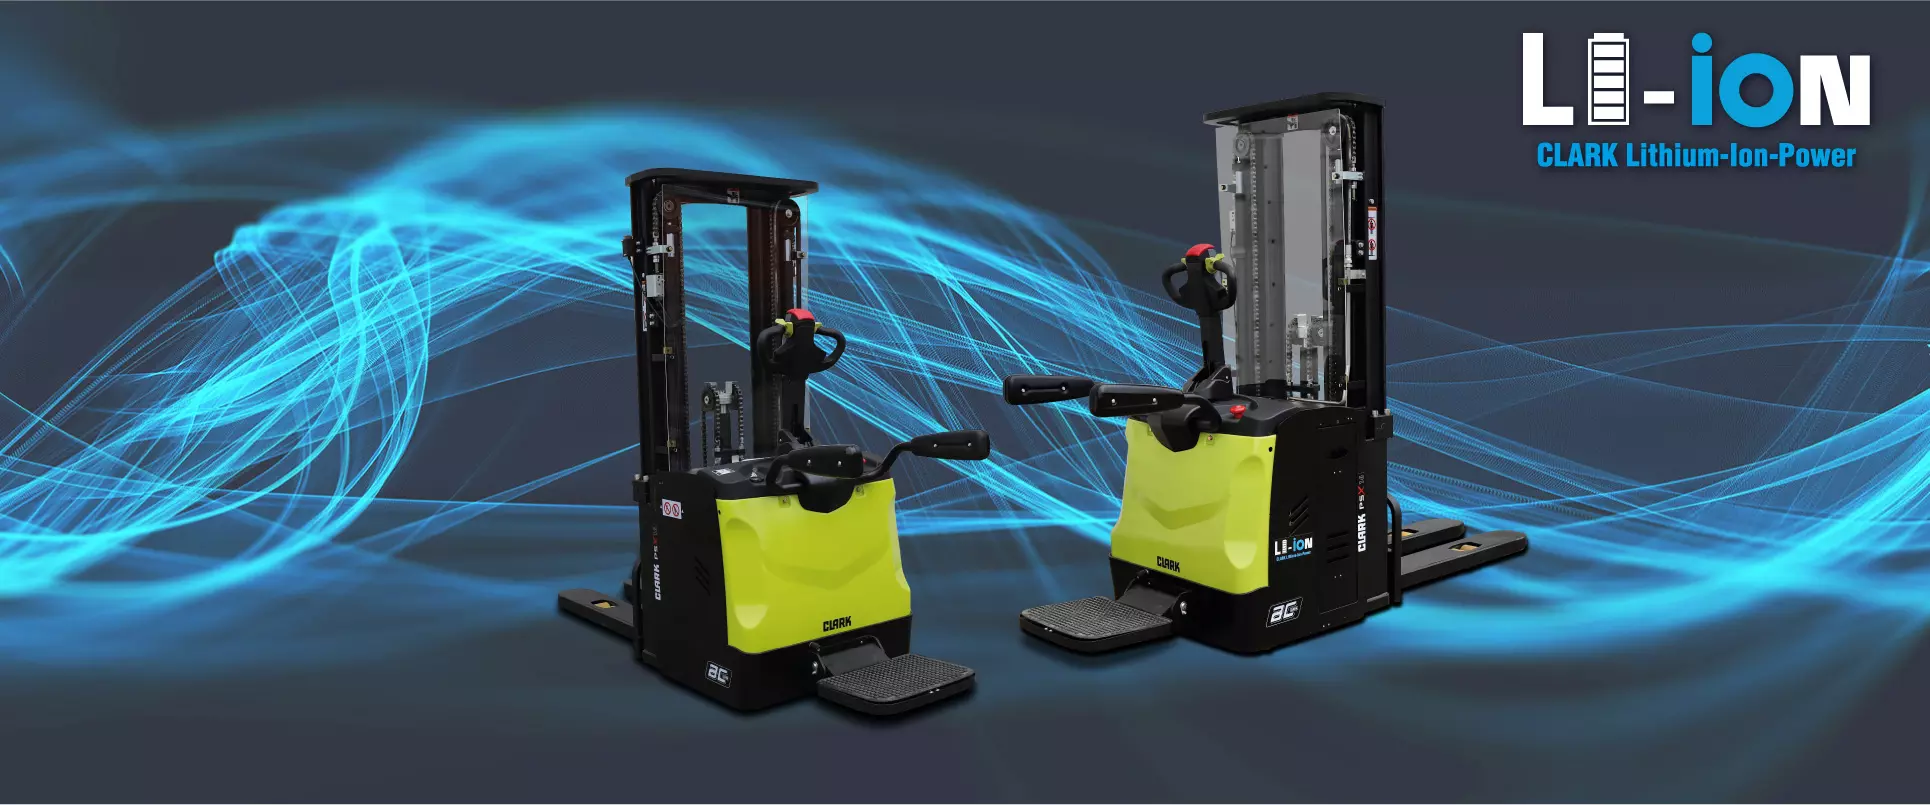 CLARK High-lift Truck with Lithium-Ion Technology